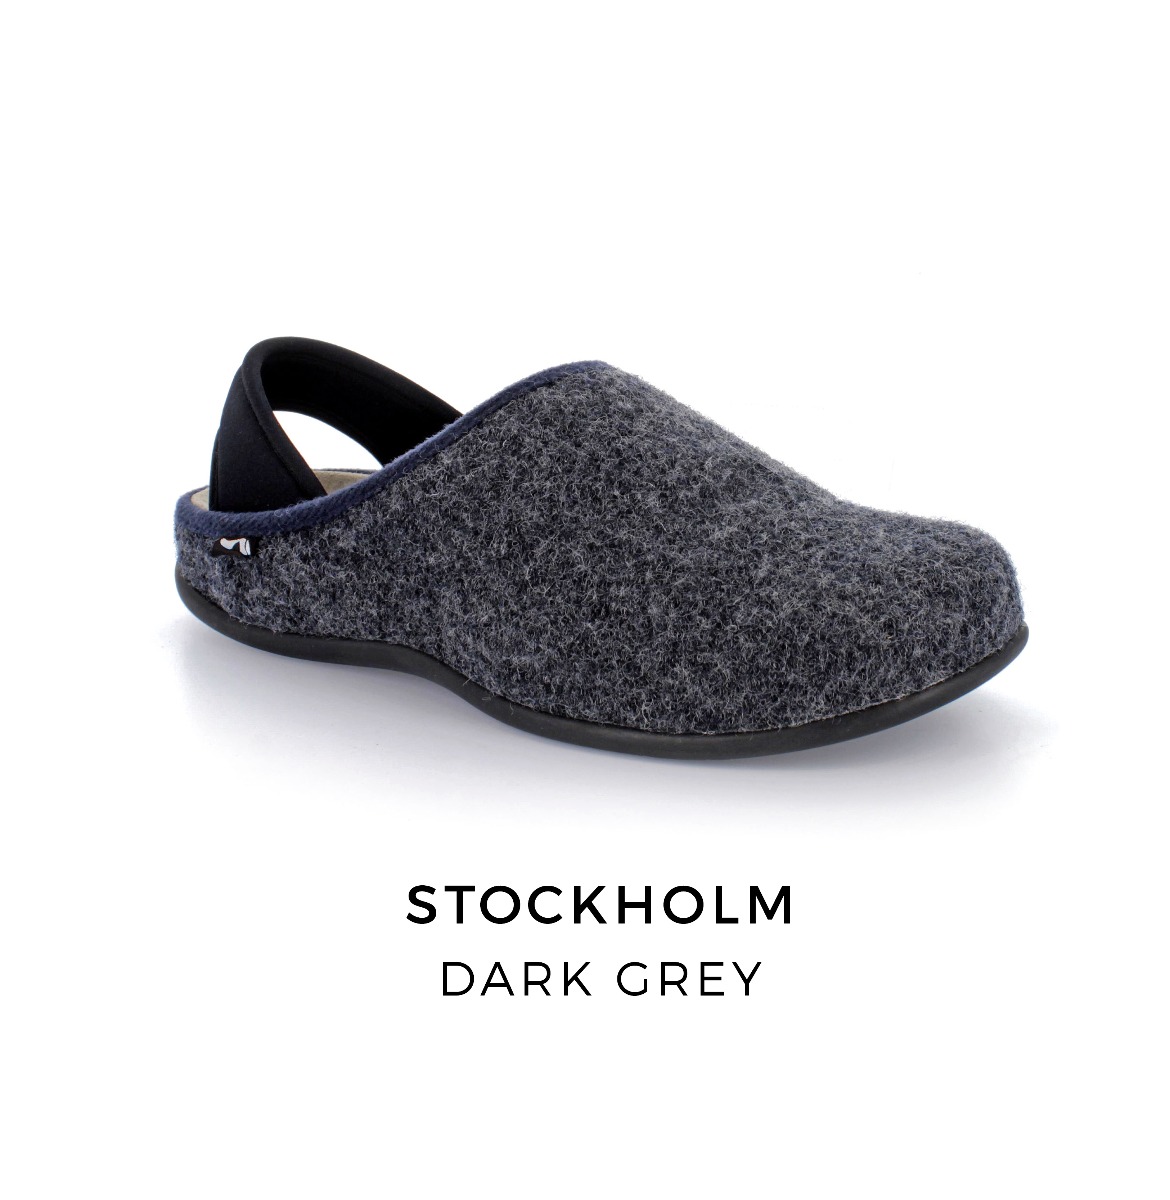 Stockholm orthotic slippers with arch support